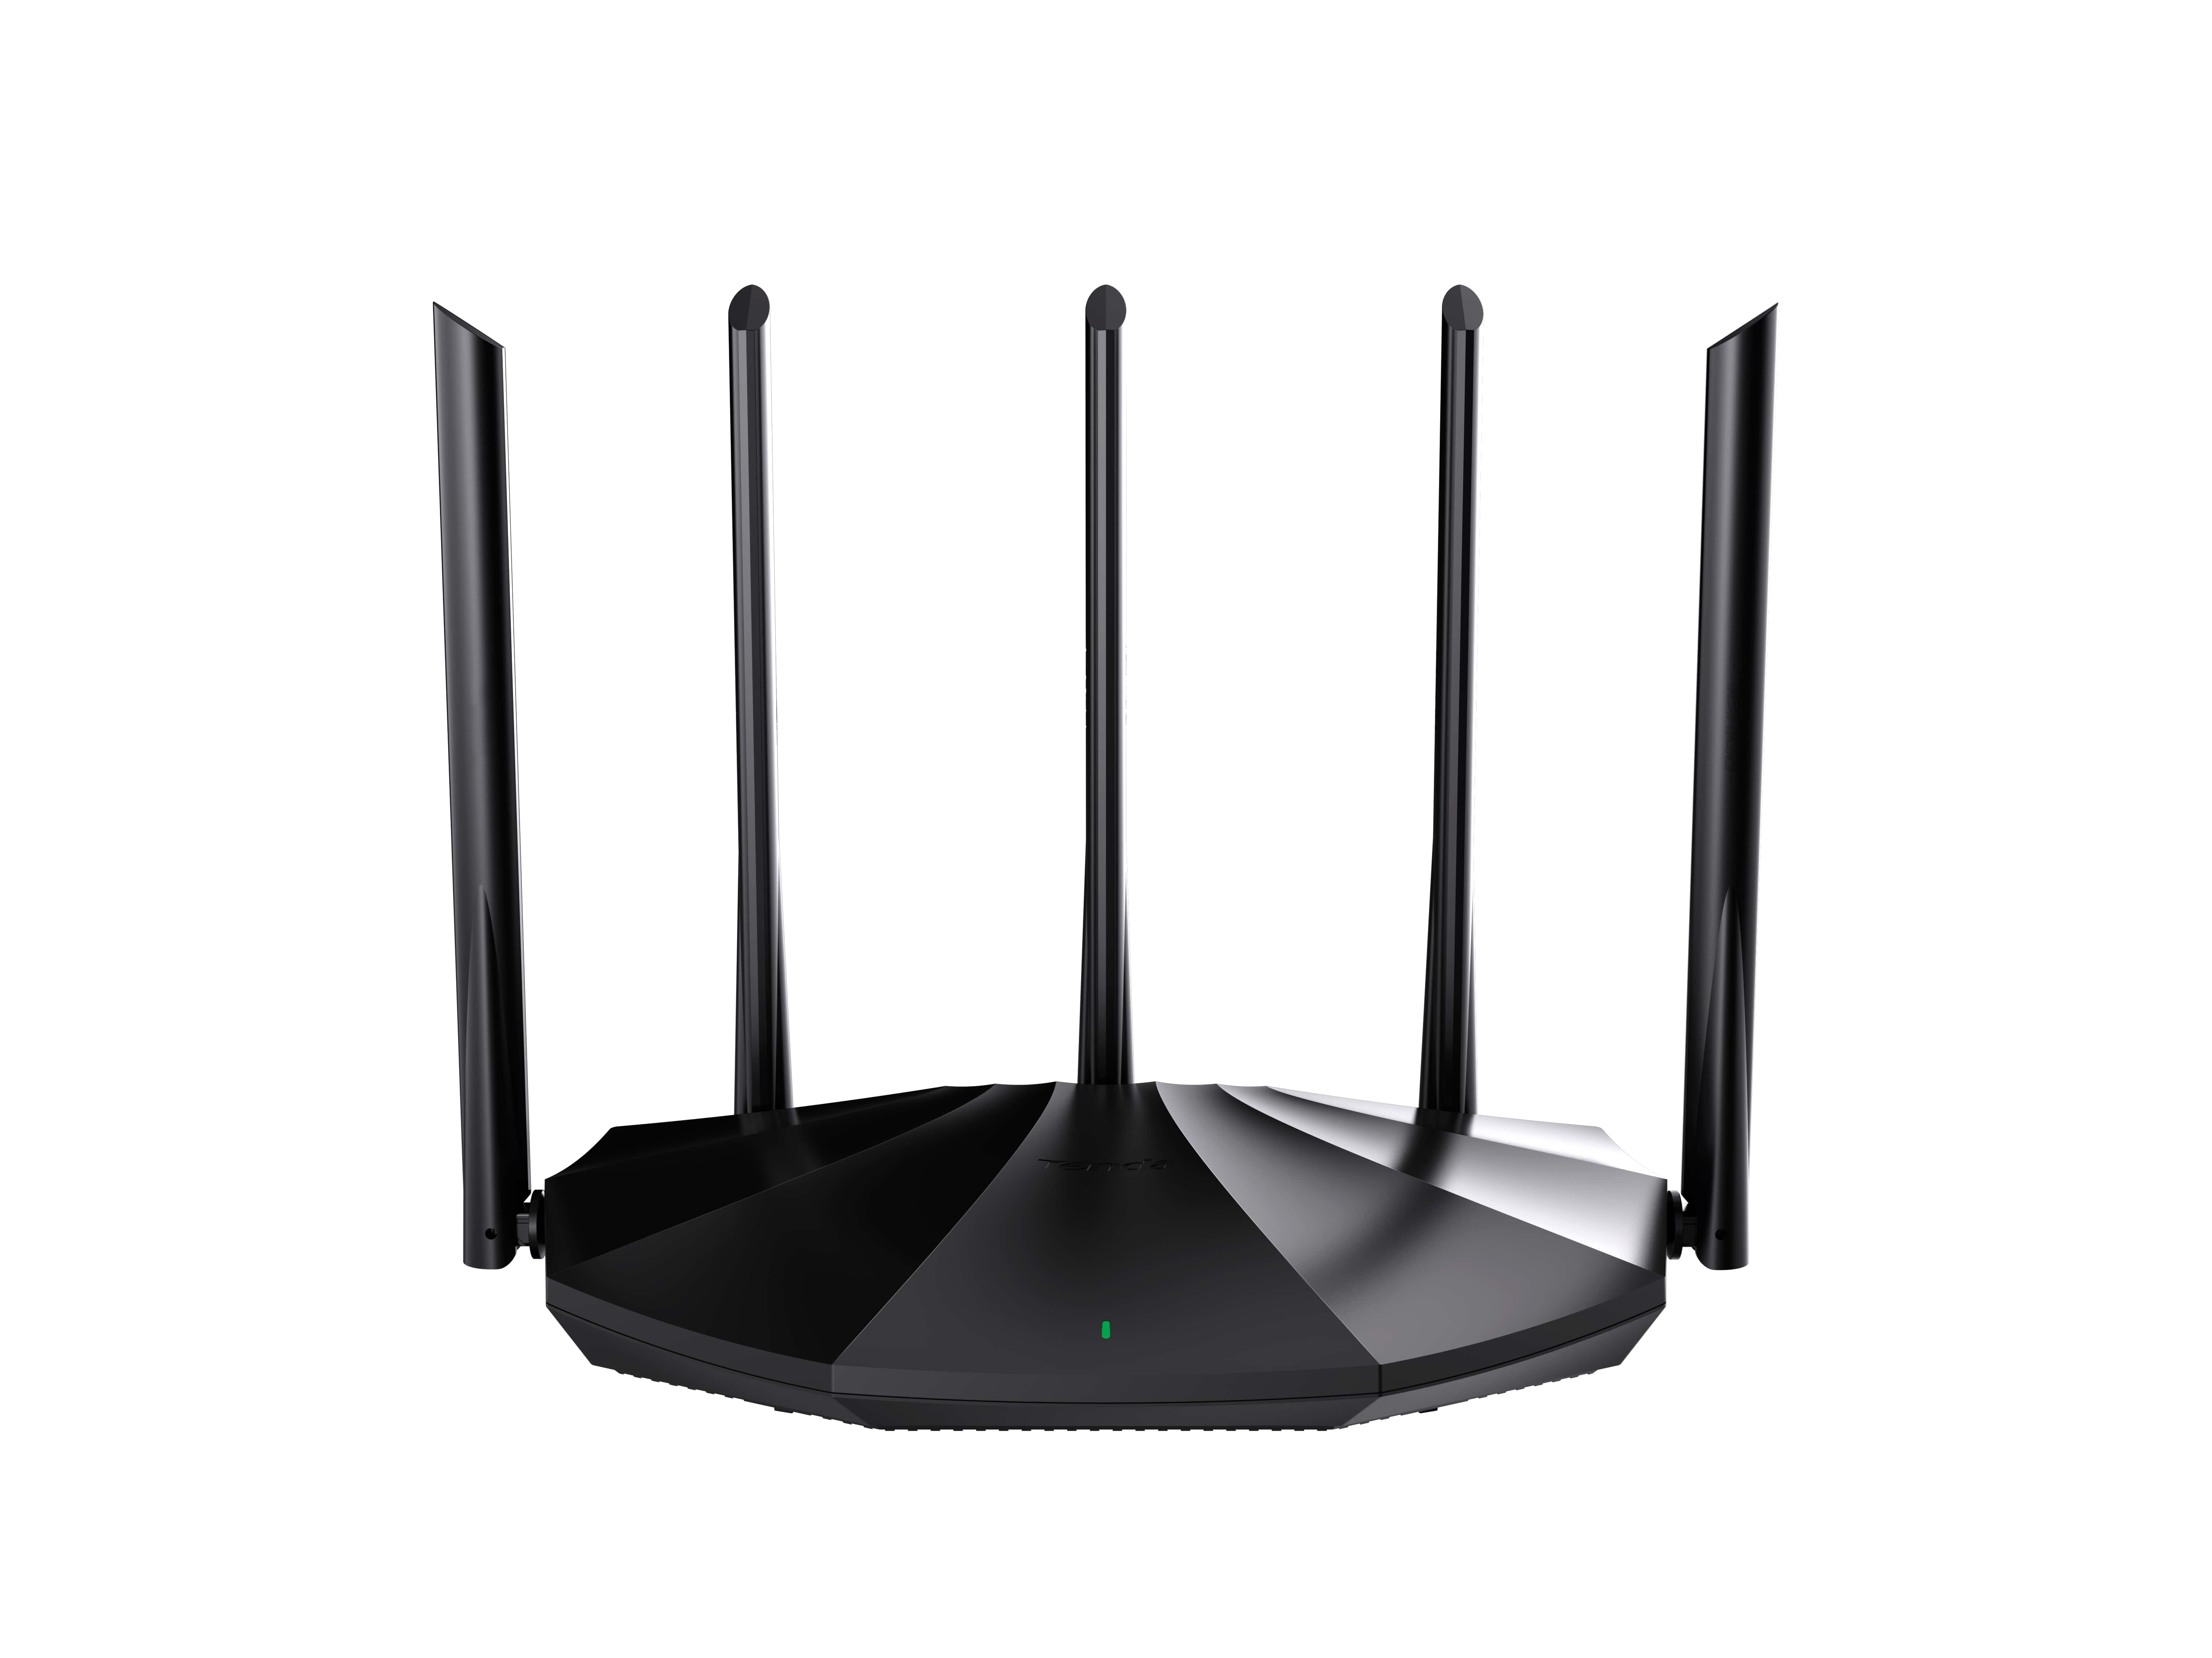 Wi-Fi 6 routers